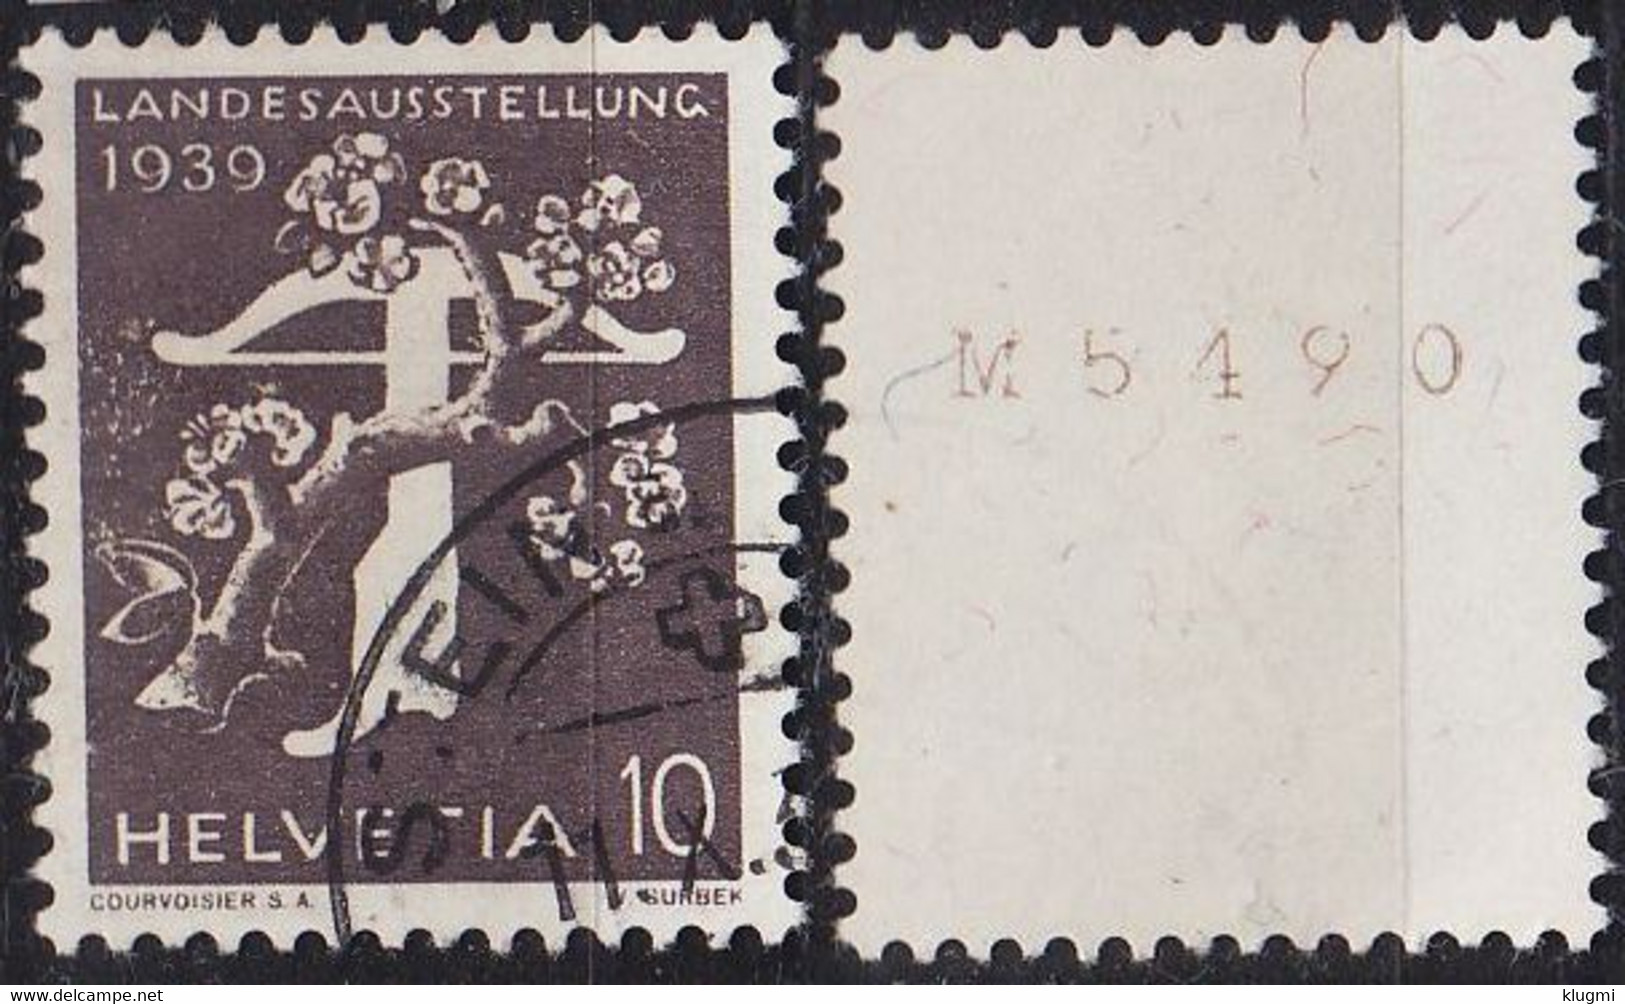 SCHWEIZ SWITZERLAND [Rolle] MiNr 0345 ( O/used ) [01] - Coil Stamps